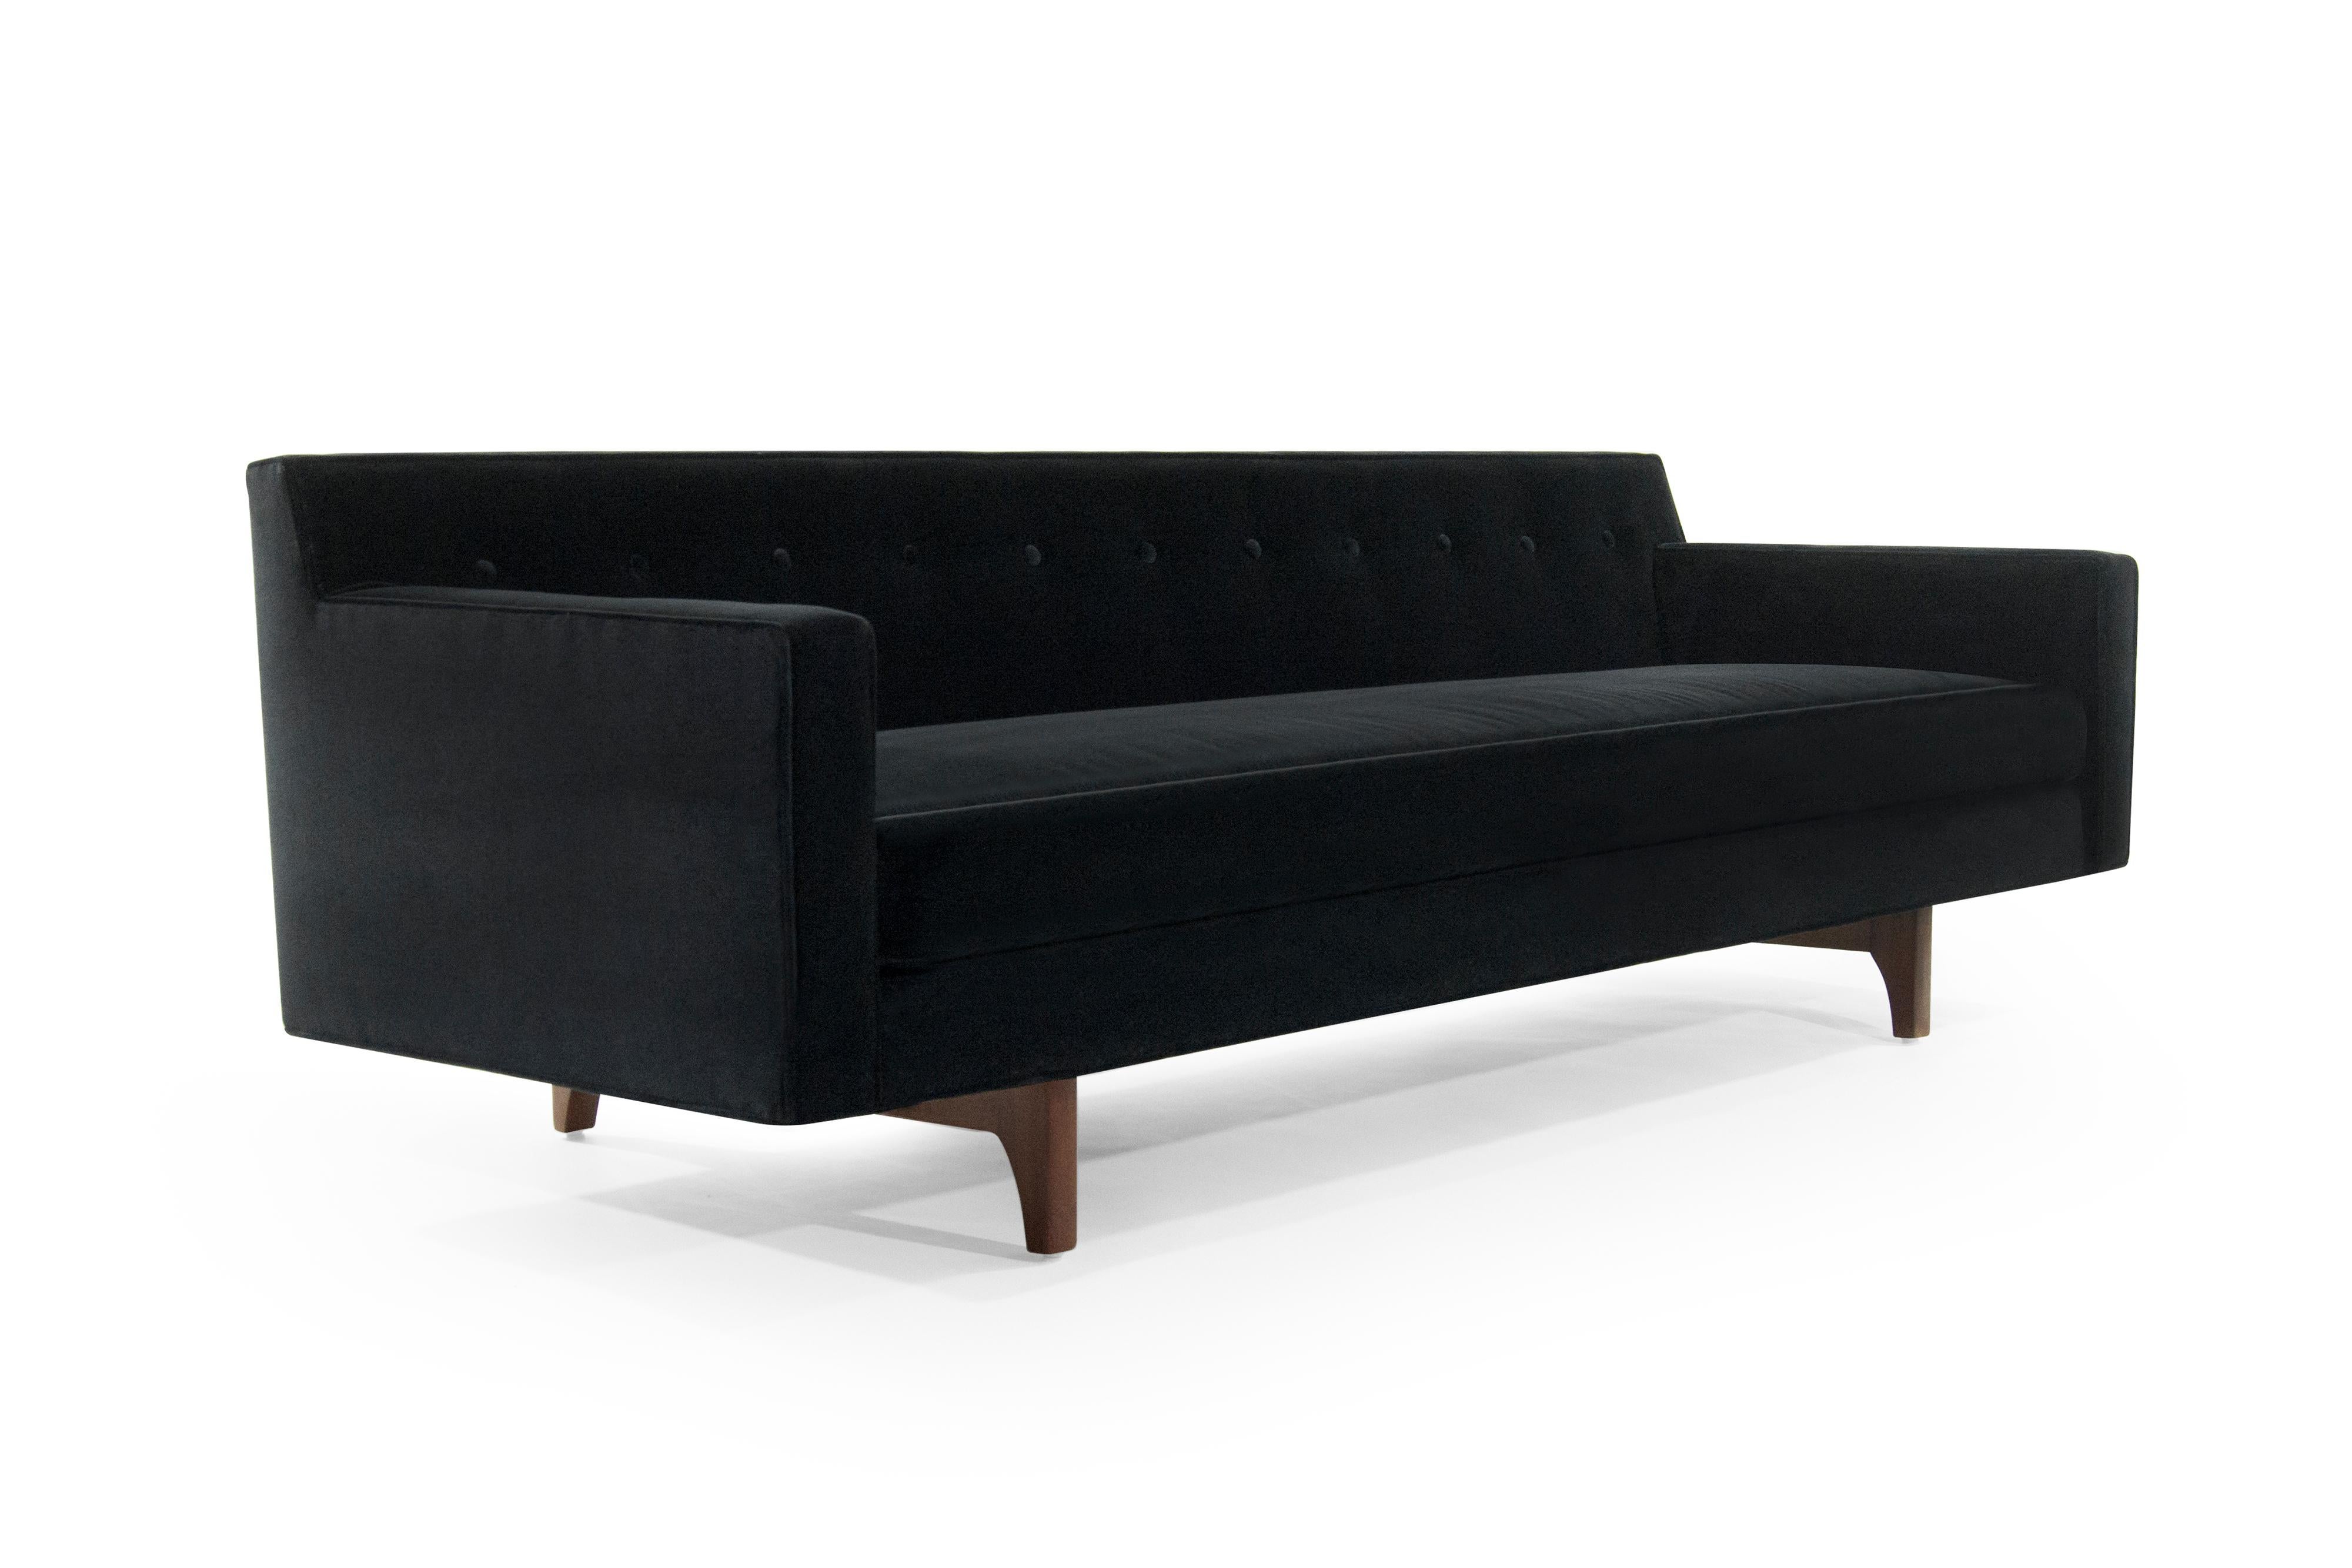 The bracket back sofa produced by Dunbar, designed by Edward Wormley, circa 1950s.

One of Wormley's most iconic designs, walnut legs and back brackets have been fully restored, newly upholstered in black mohair.